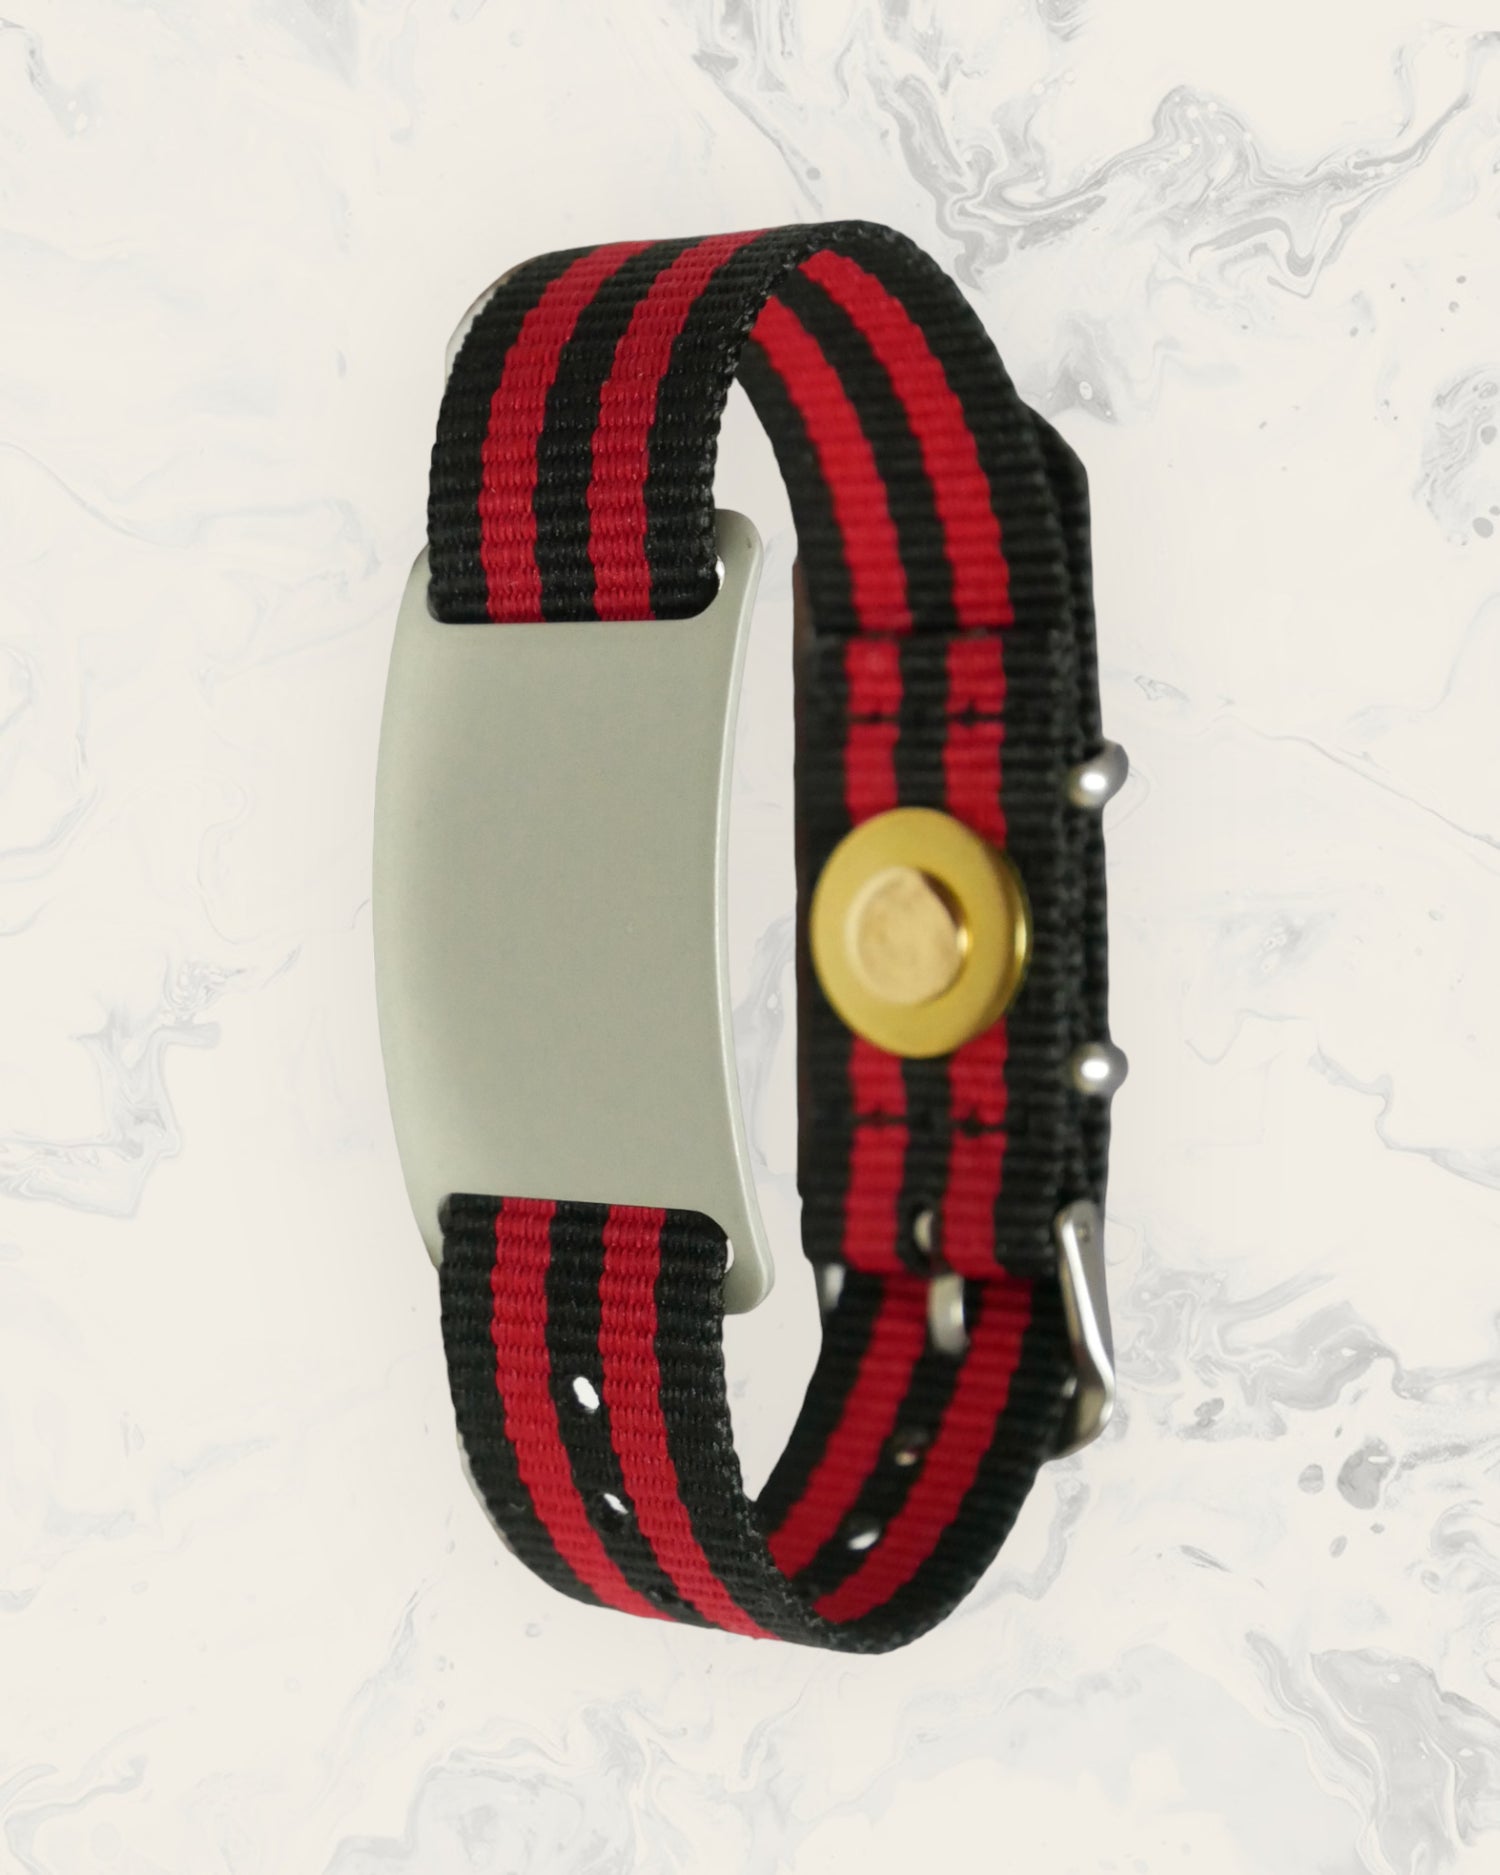 Natural Pain Relief and EMF Protection Bracelet Nylon Band Color Black and Red Striped with a Silver Slider